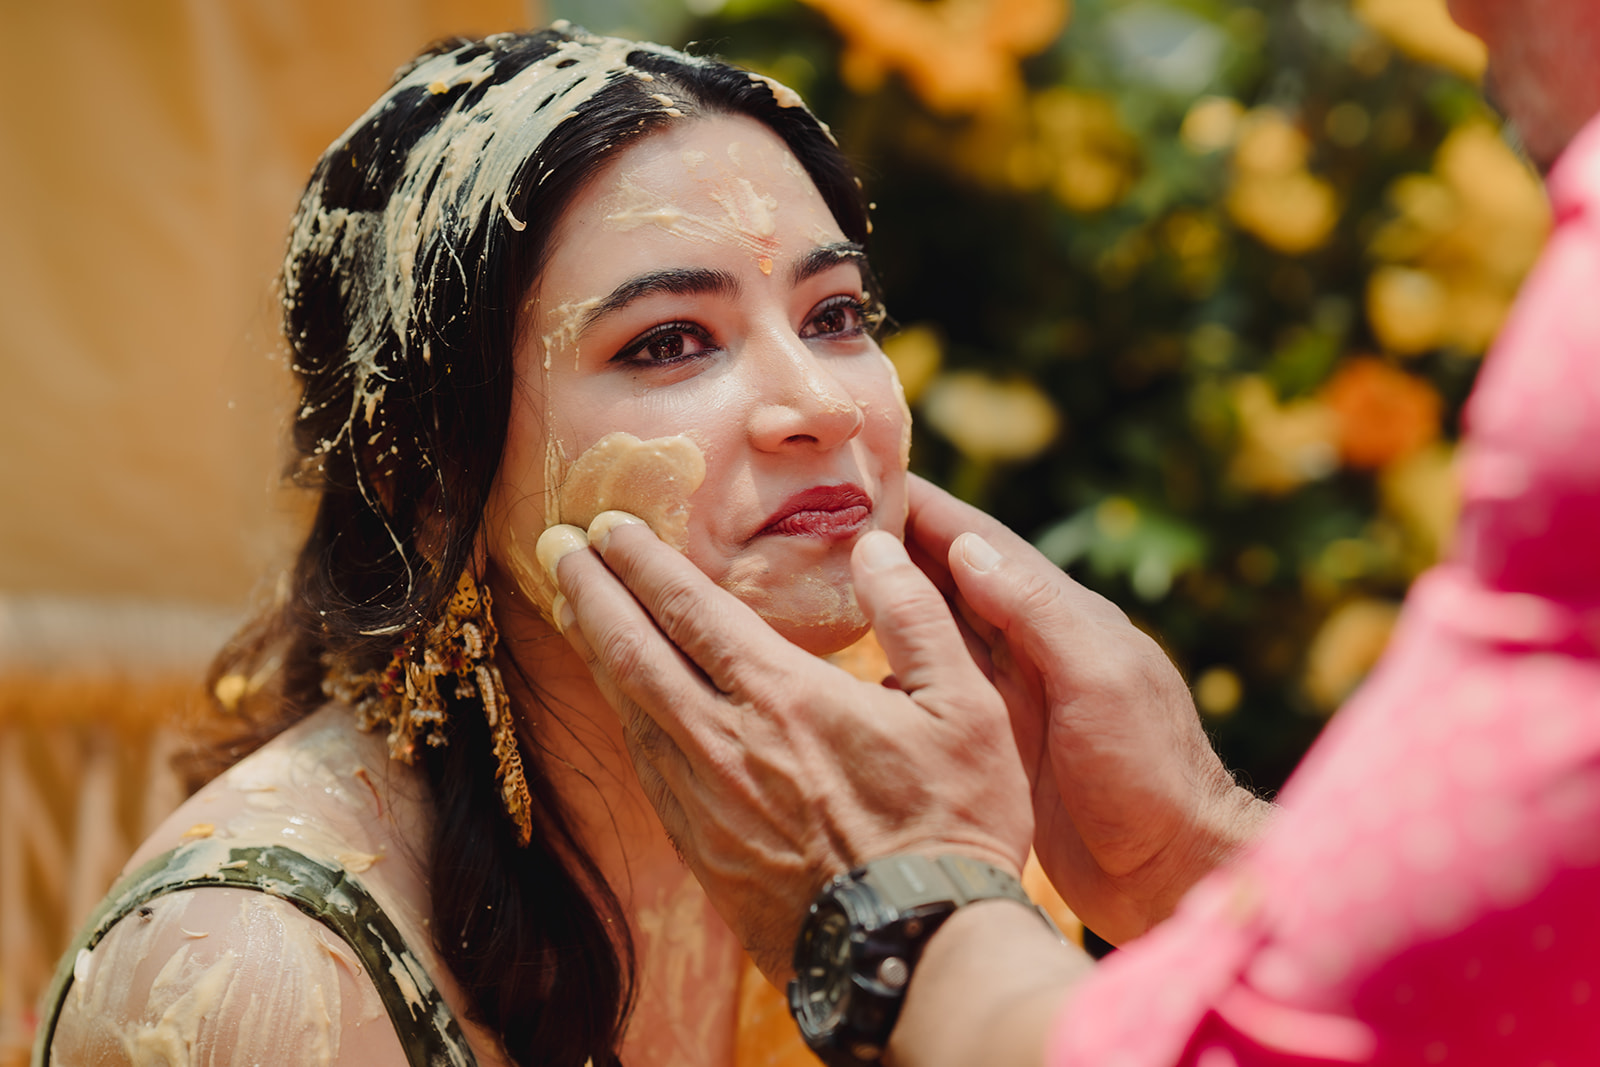 Bridal emotions: A touching moment as the bride expresses deep feelings during her haldi